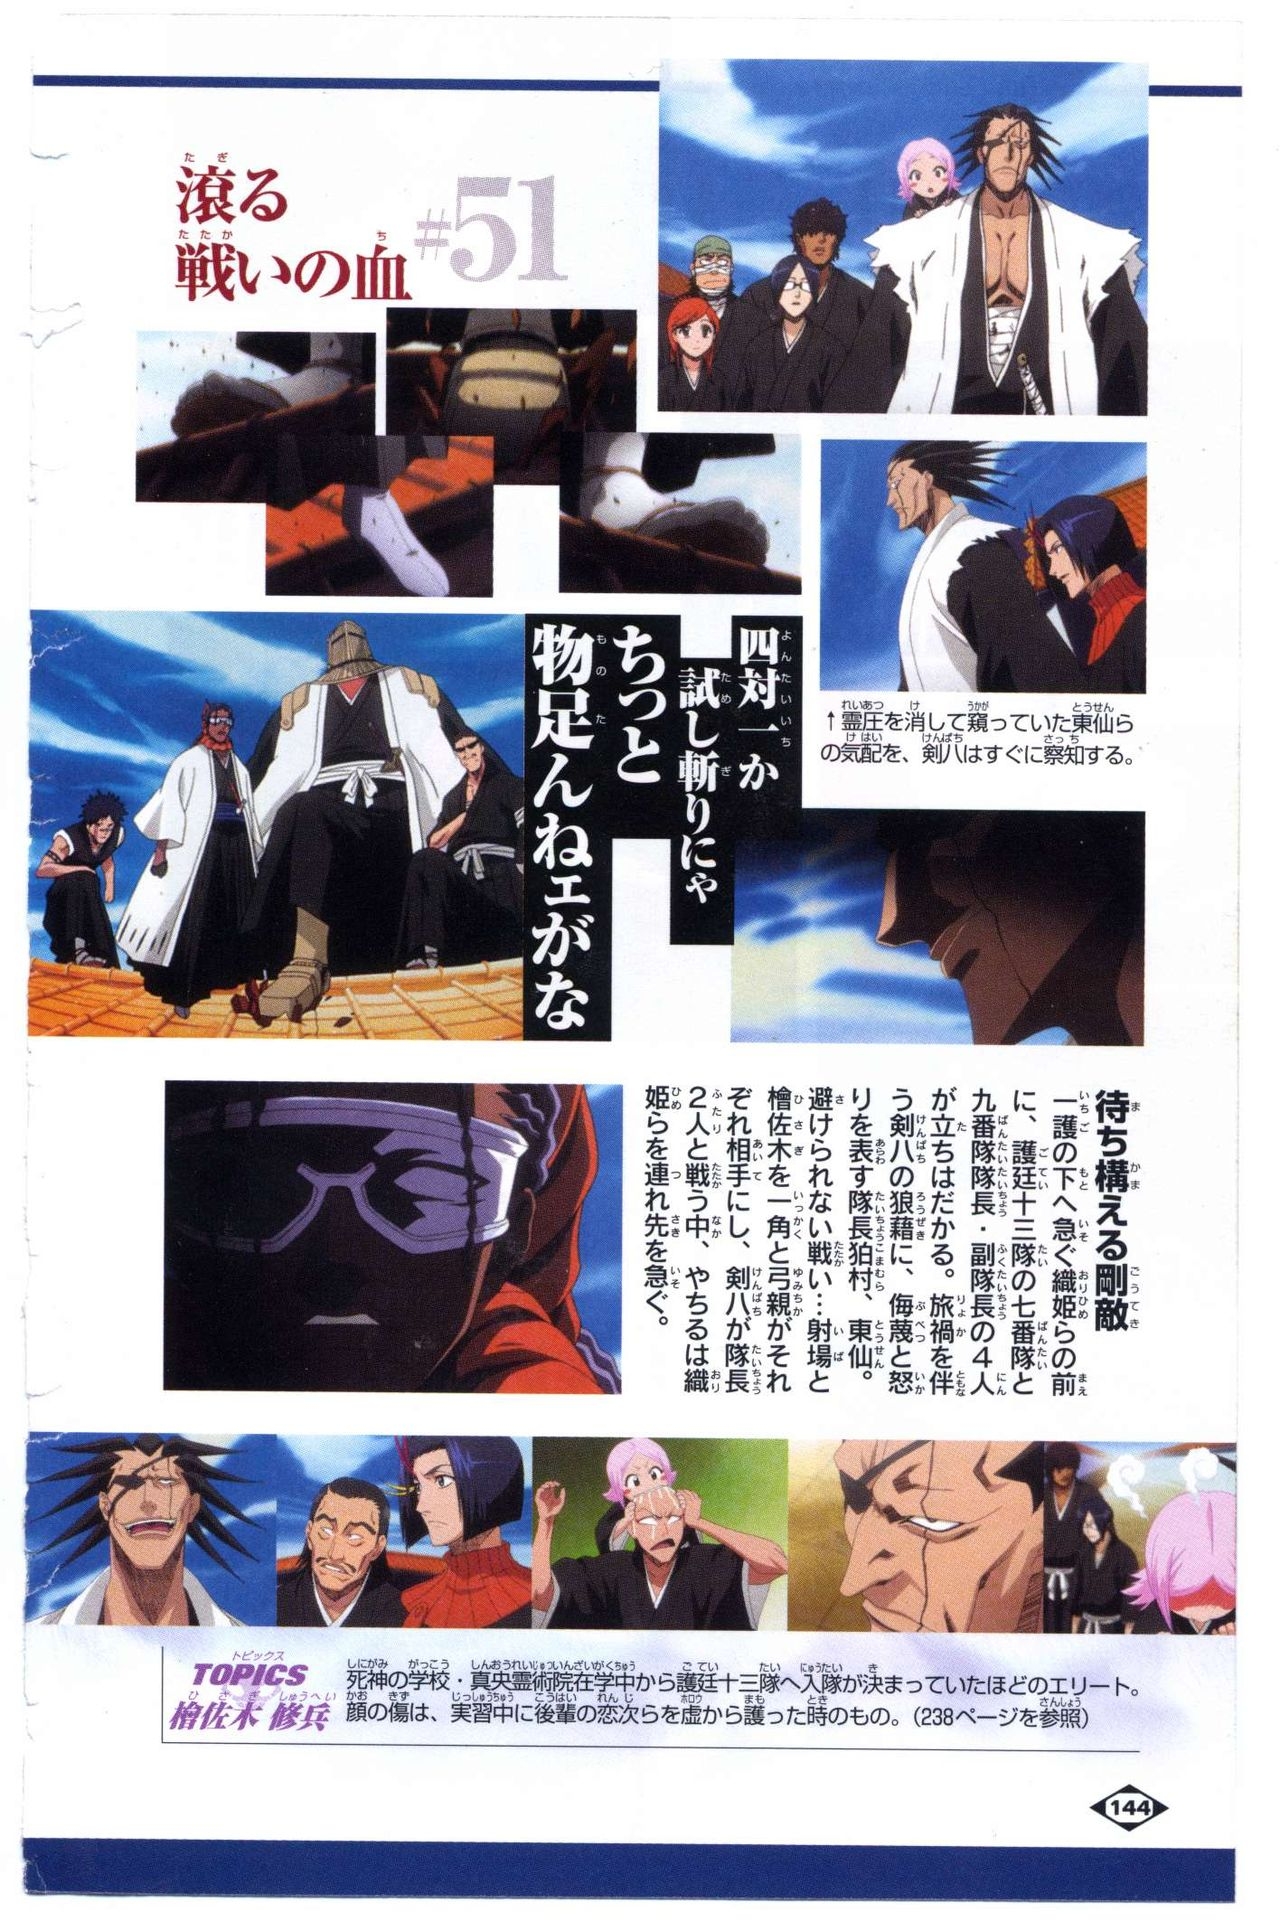 Bleach: Official Animation Book VIBEs 144